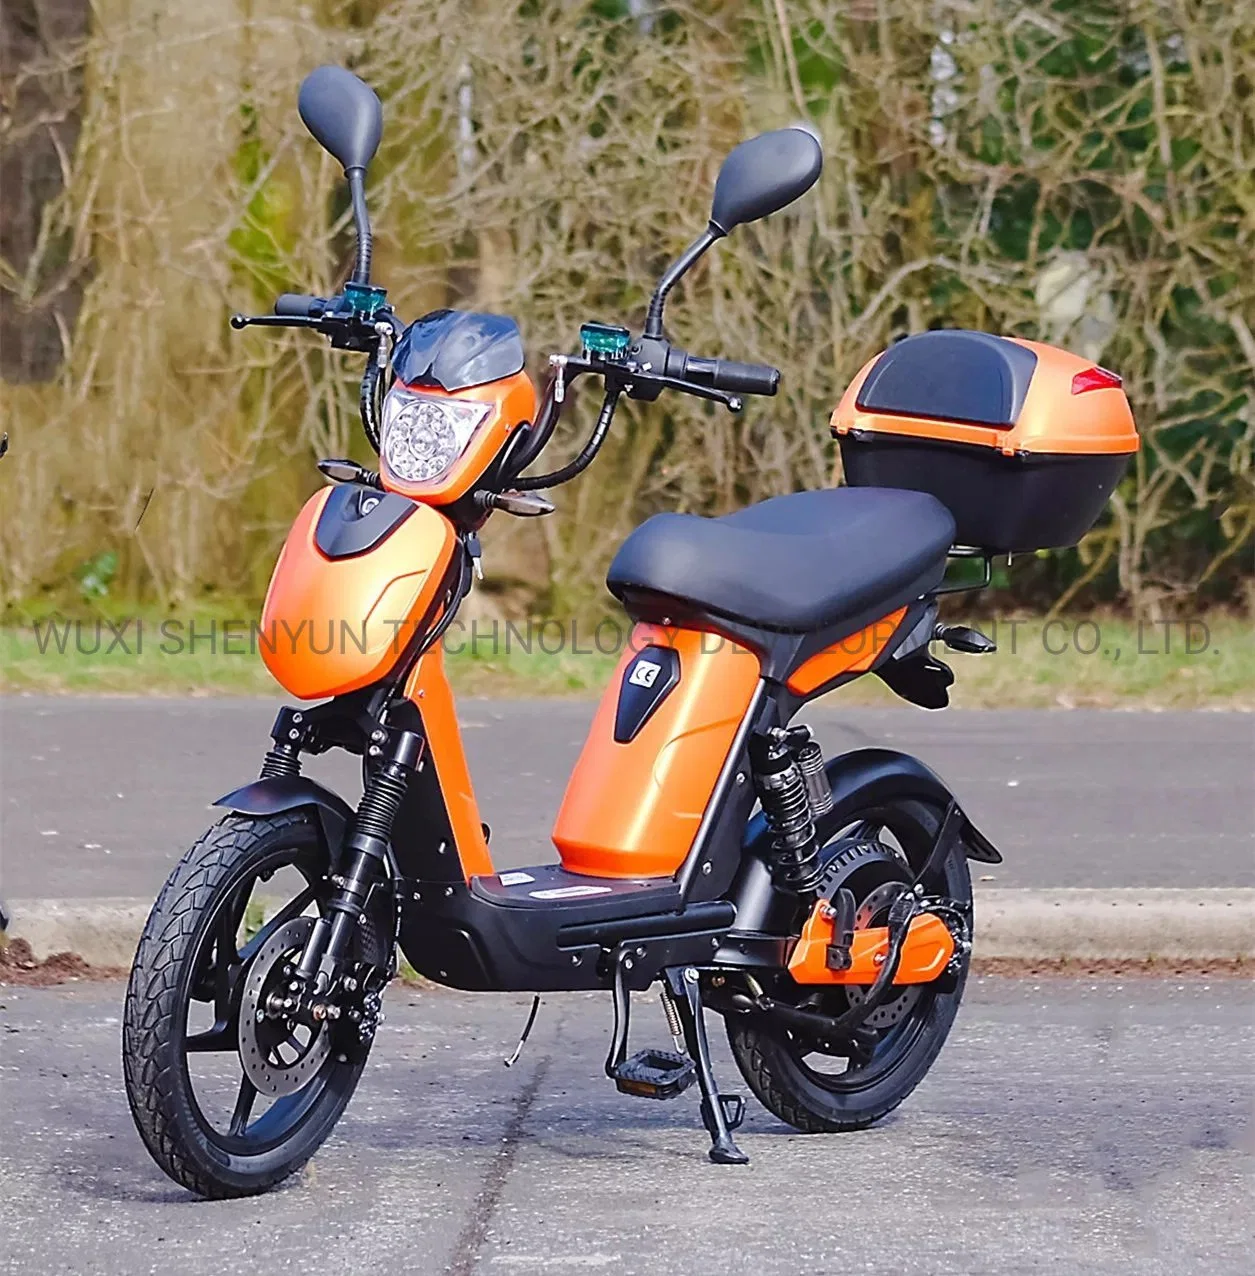 Top Sales Electric Sport Bike with Longest Mileage Range Mobility Scooter E Motor Cycle EEC/Coc CE